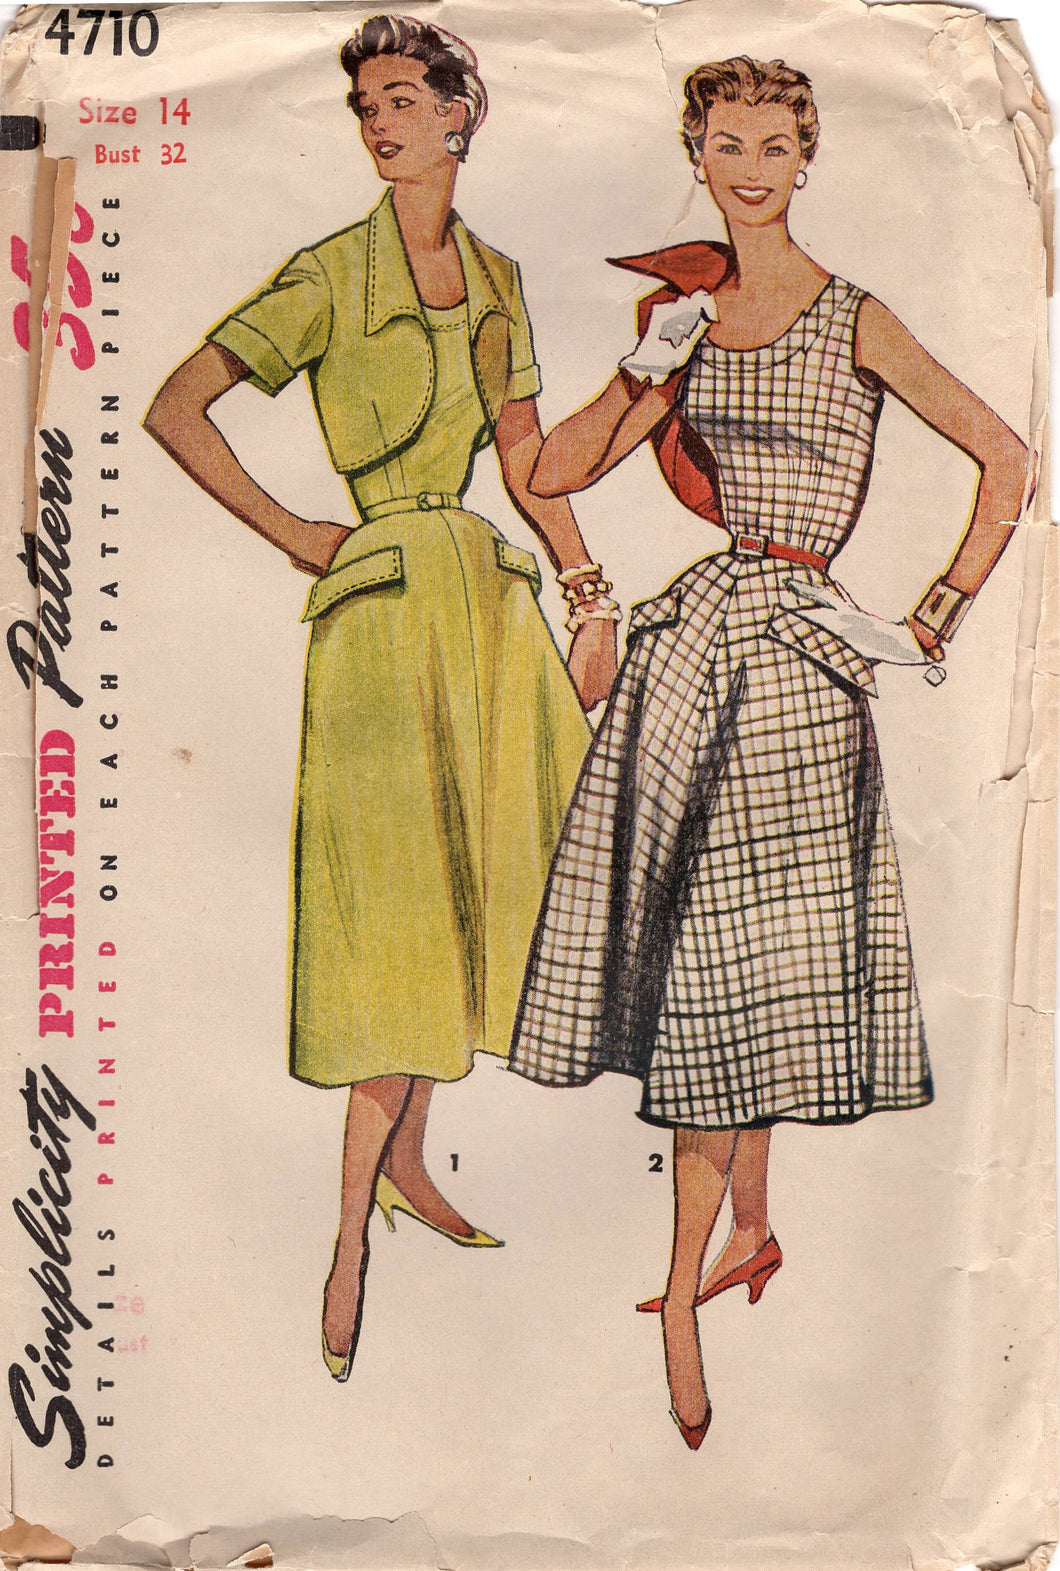 1950's Simplicity One Piece Dress with Jagged Neckline and Bolero Pattern - Bust 32